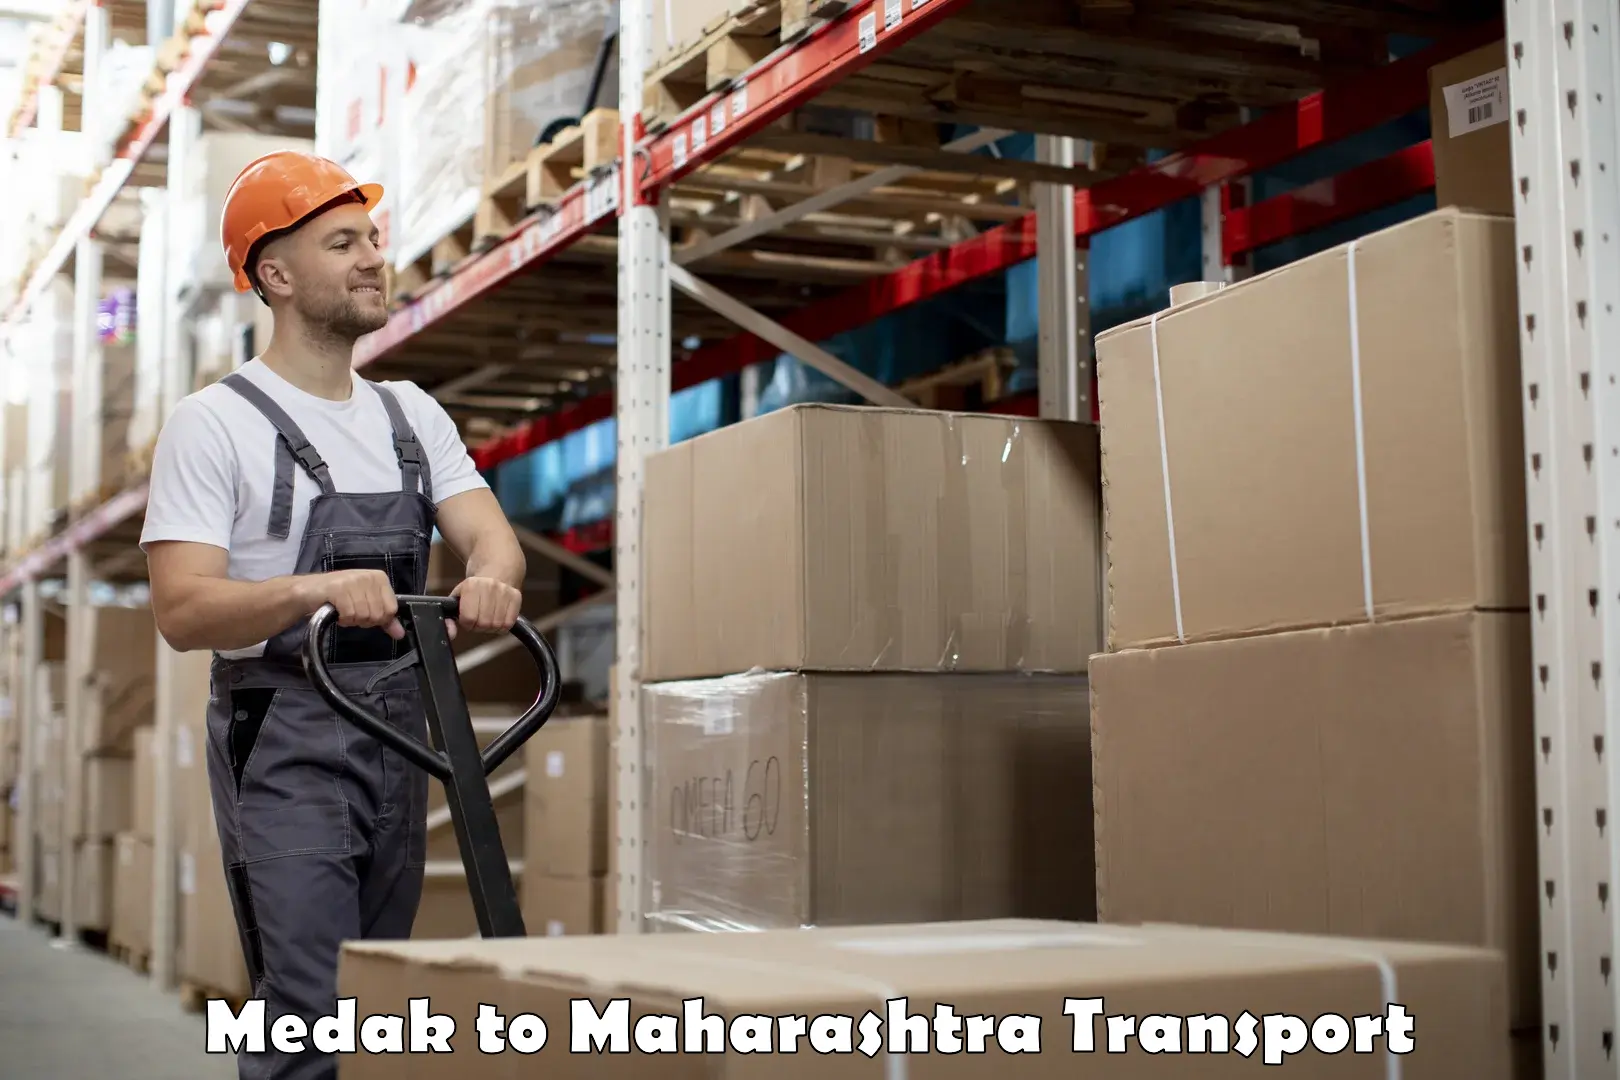 Truck transport companies in India Medak to Dharmabad